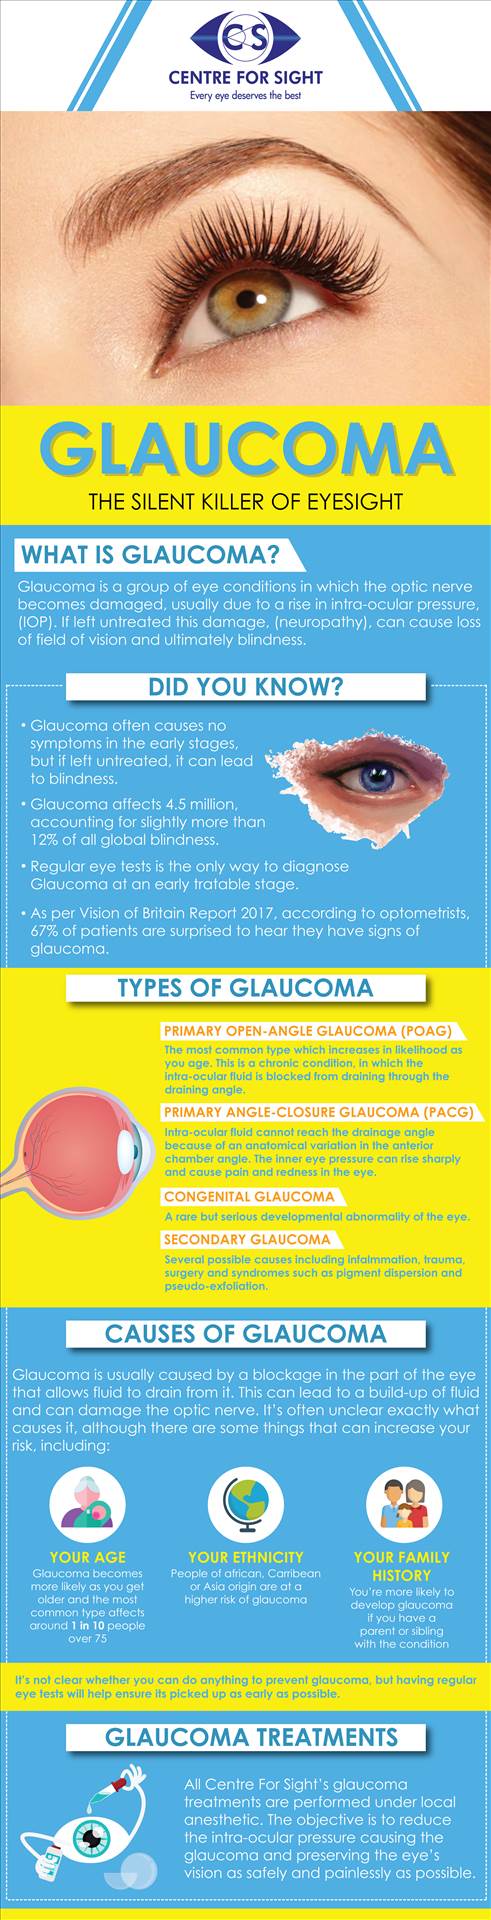 What is Glaucoma Glaucoma is a group of eye conditions in which the optic nerve becomes damaged, usually due to a rise in intra-ocular pressure, (IOP). If left untreated this damage, (neuropathy), can cause loss of field of vision and ultimately blindness. by centreforsight